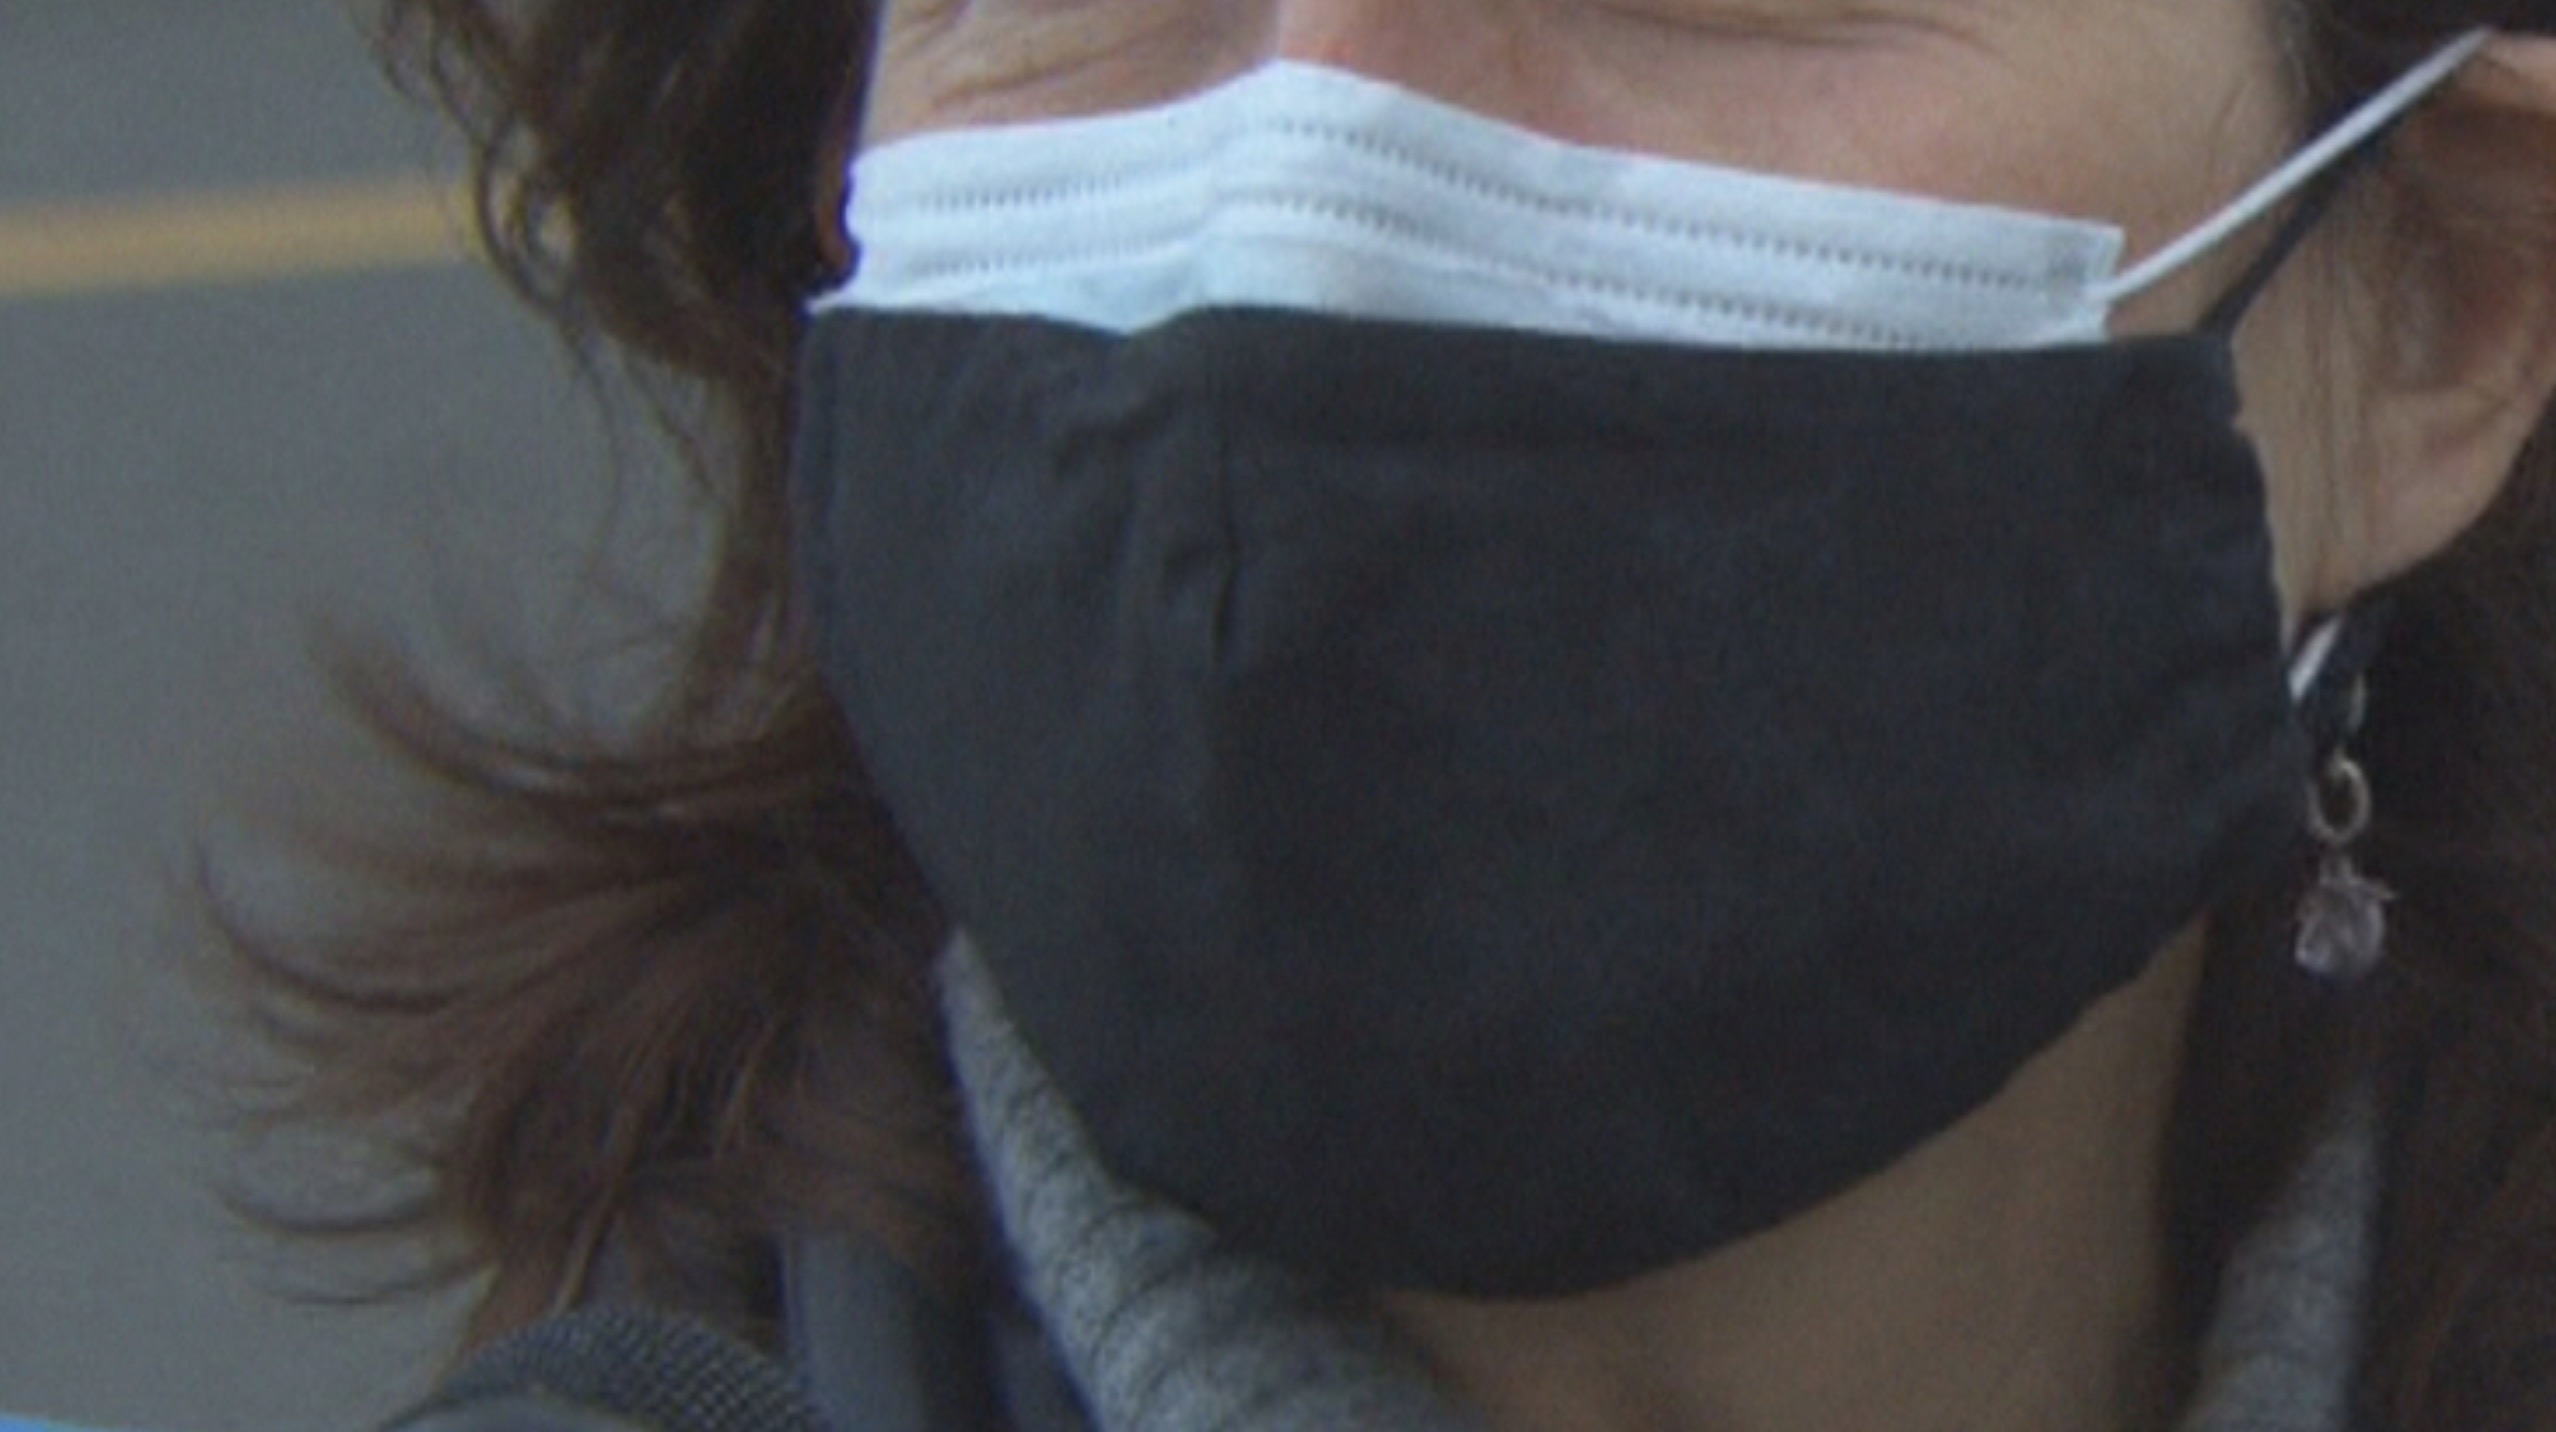 A woman is seen wearing two masks to try to prevent the spread of COVID-19.